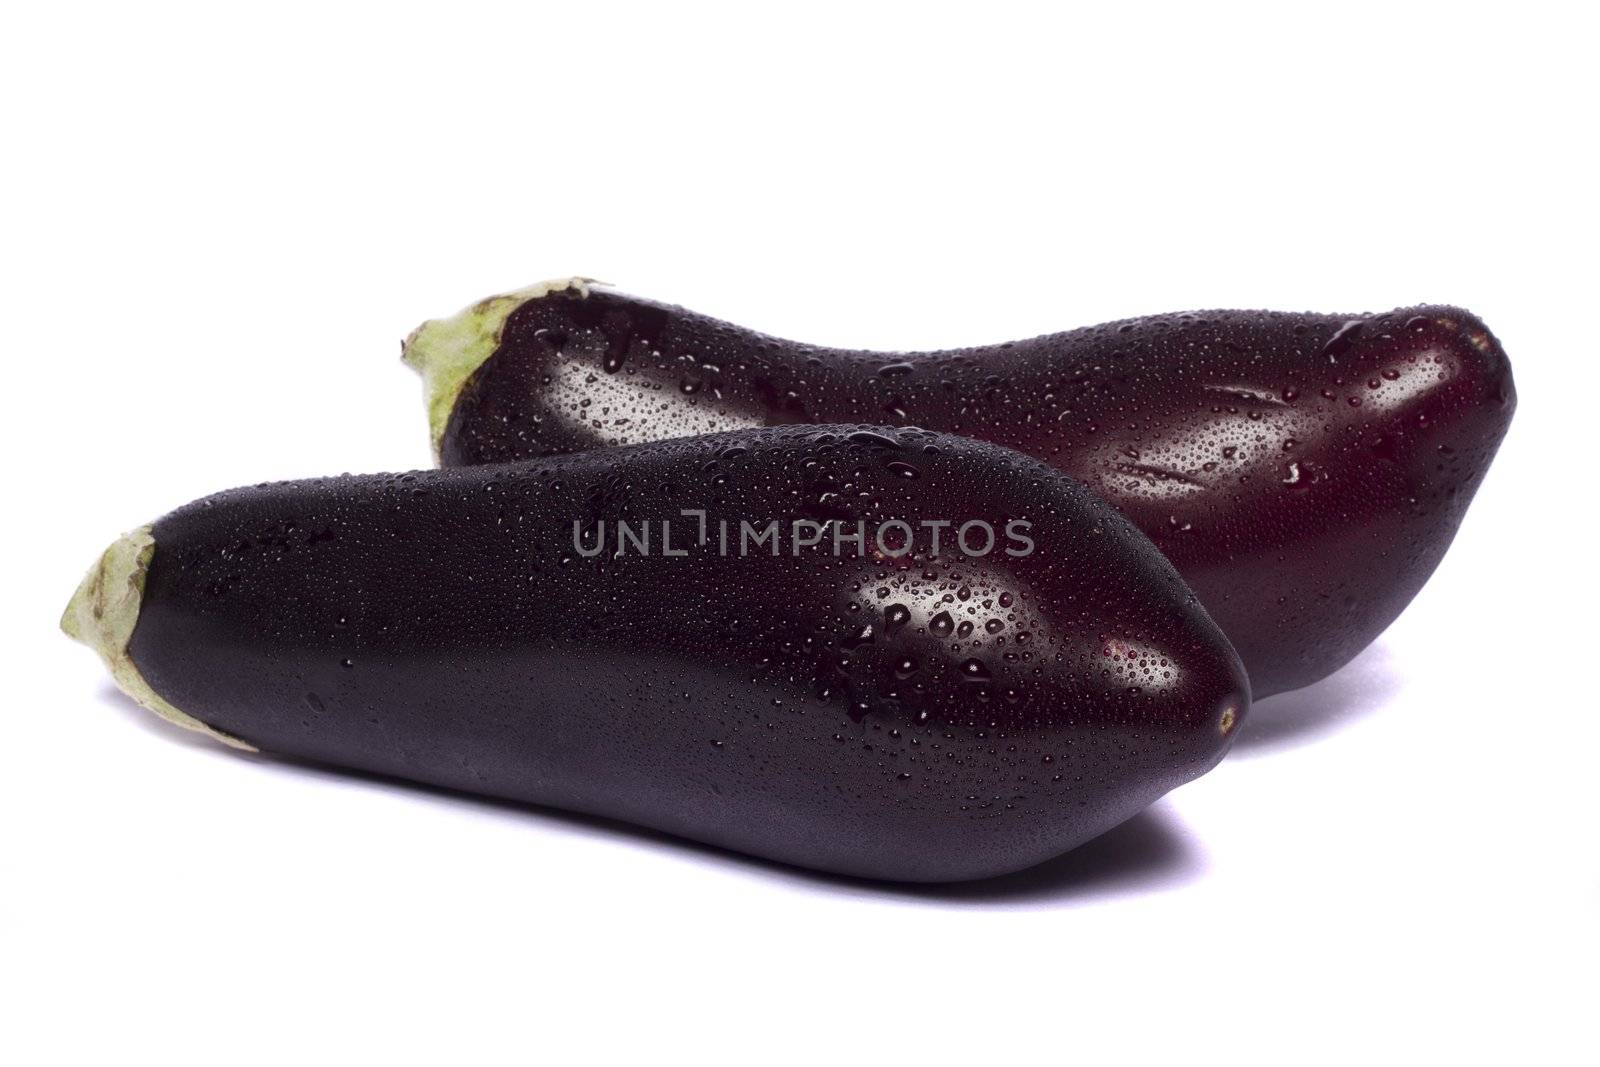 eggplant on white background by membio